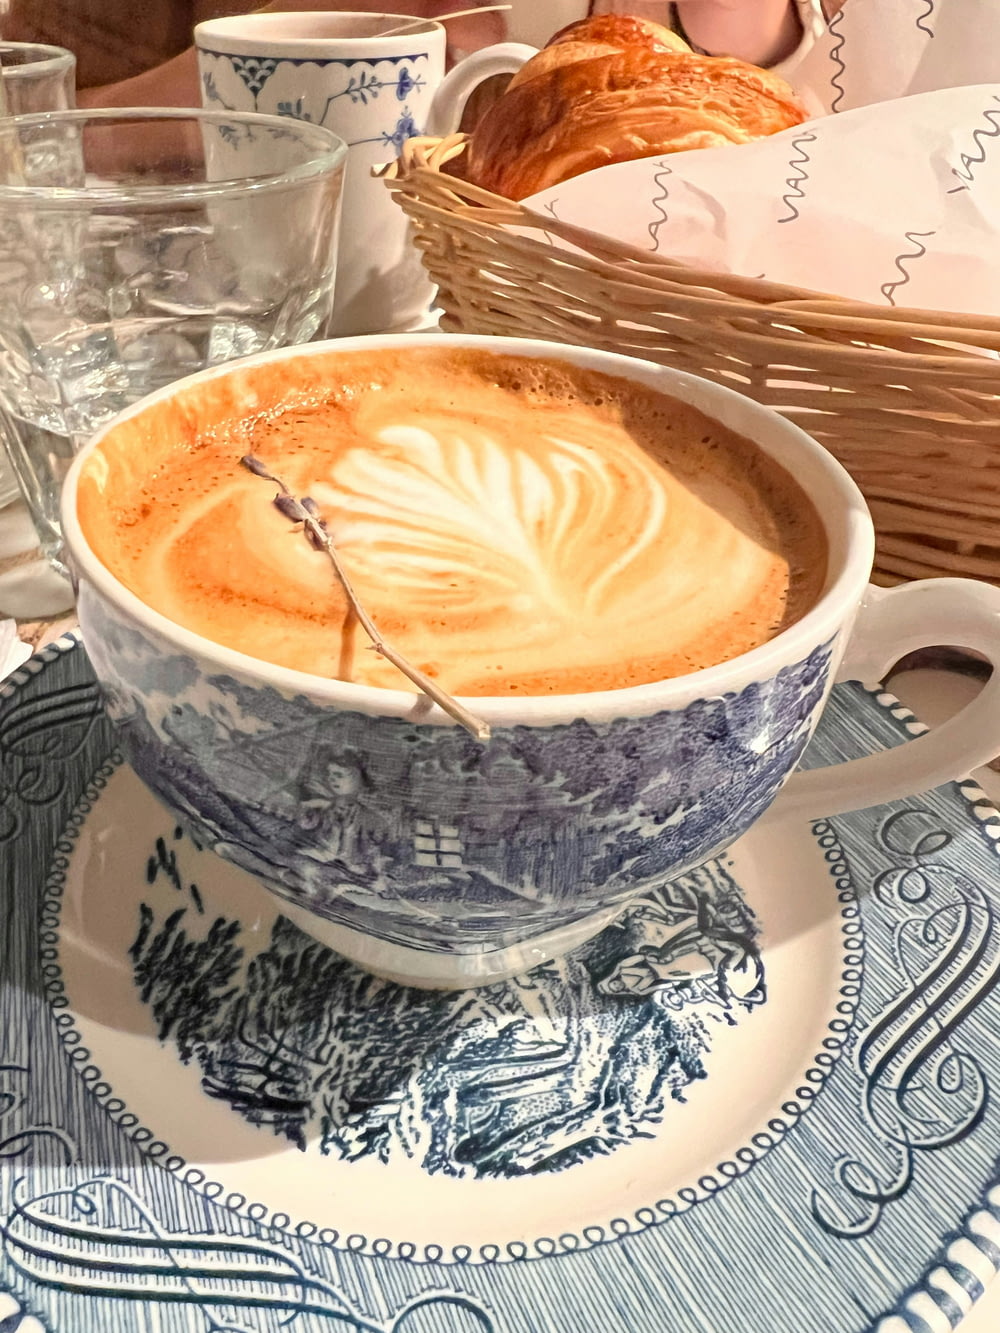 a cup of coffee on a blue and white plate